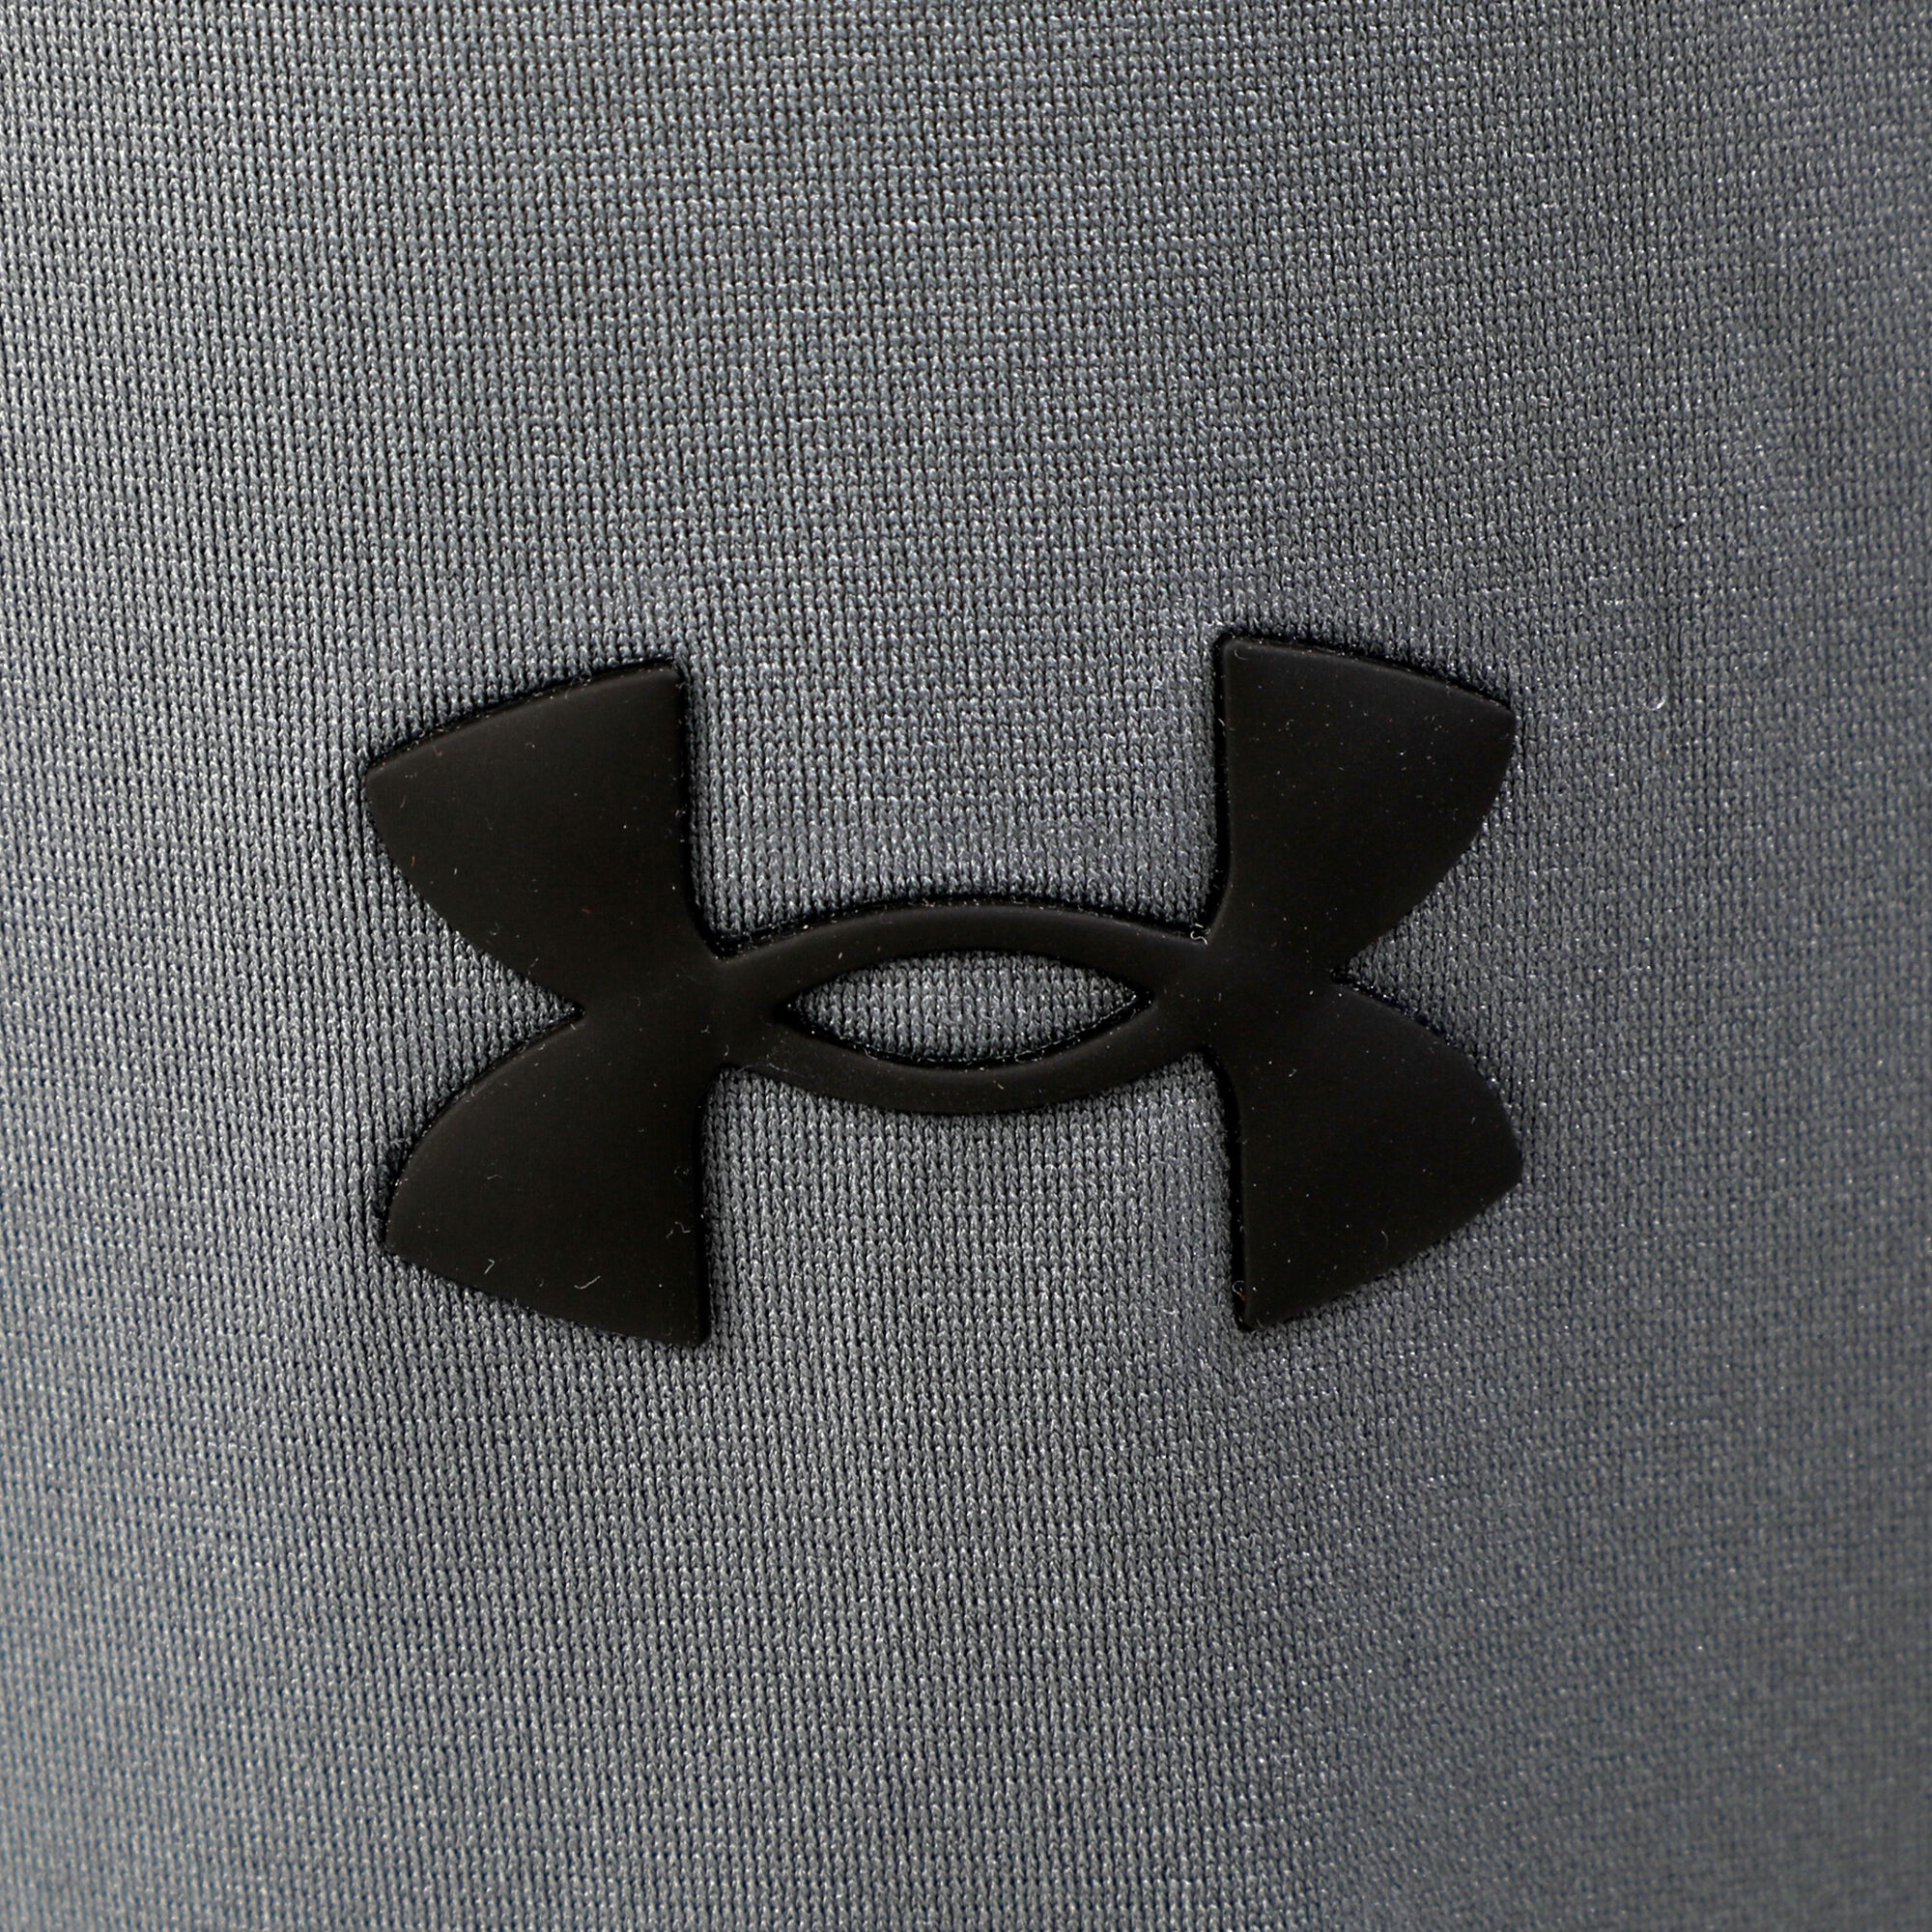 Shop for Under Armour Men's Tracksuits - UA India